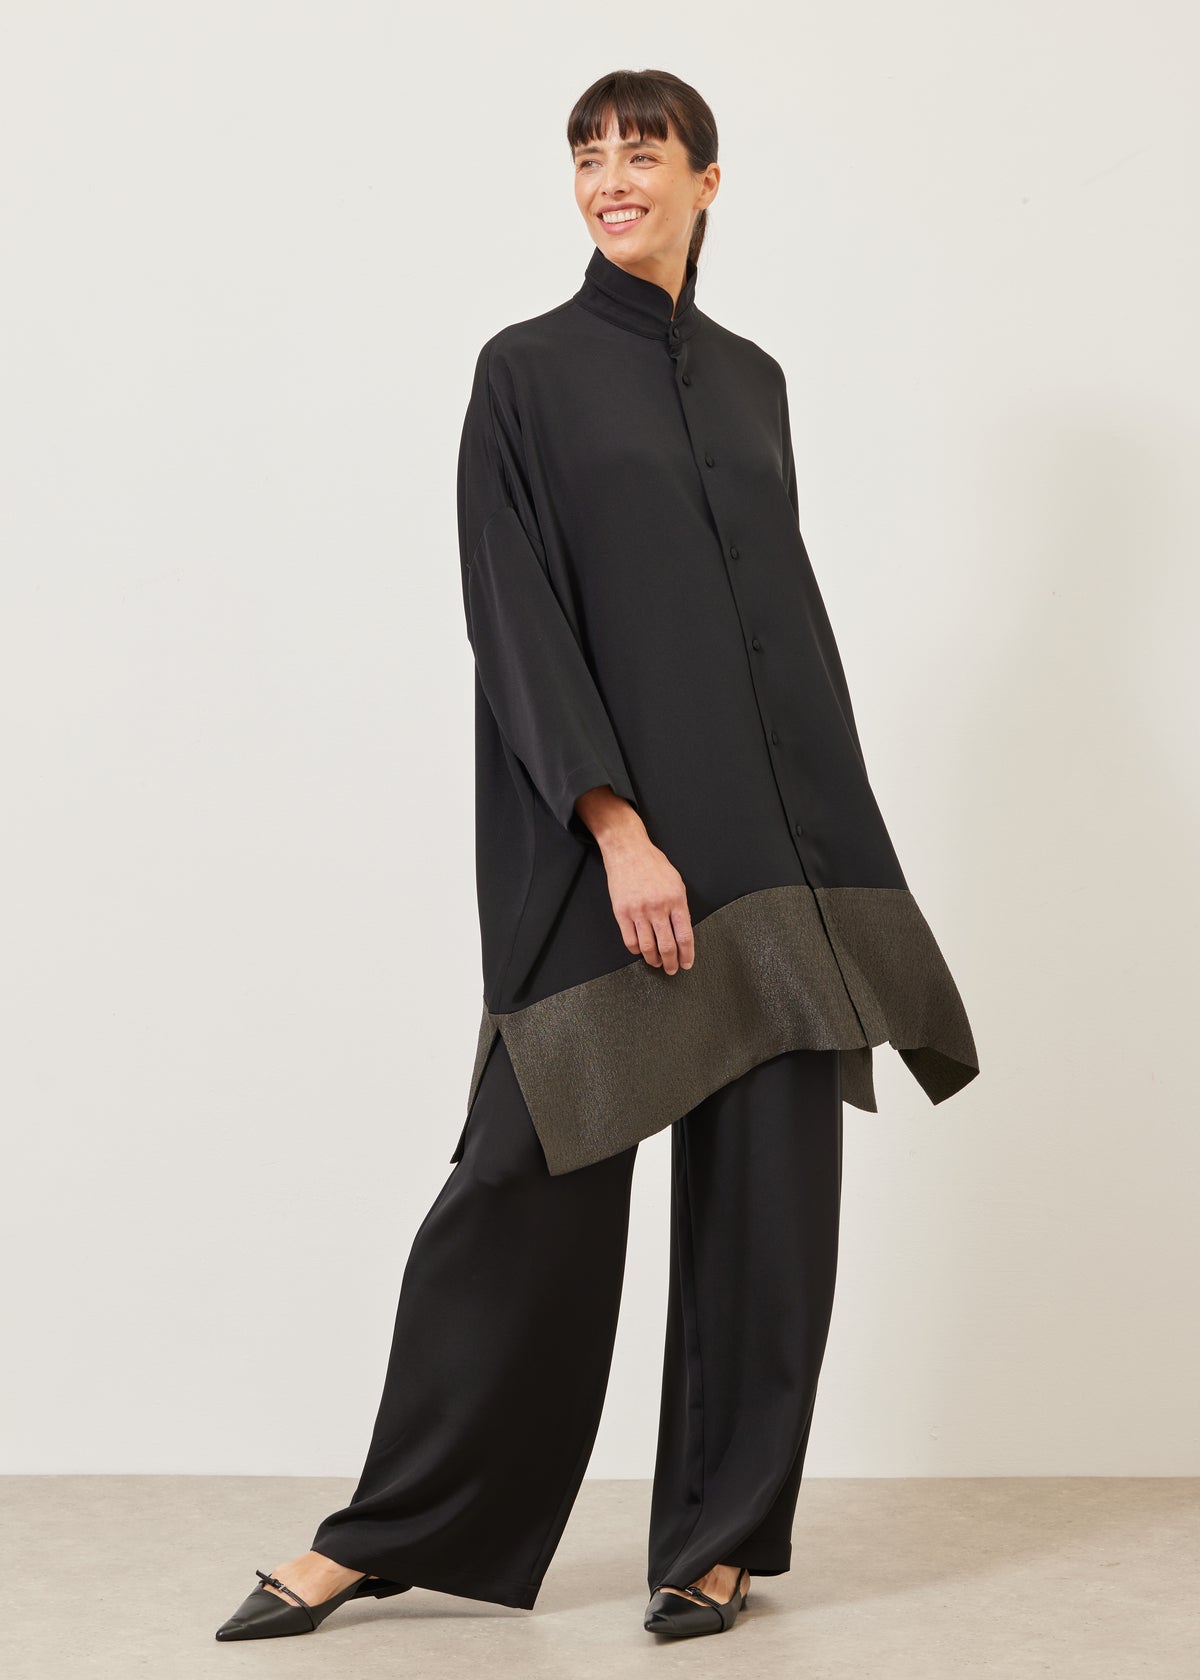 wide double stand collar shirt - very long with slits